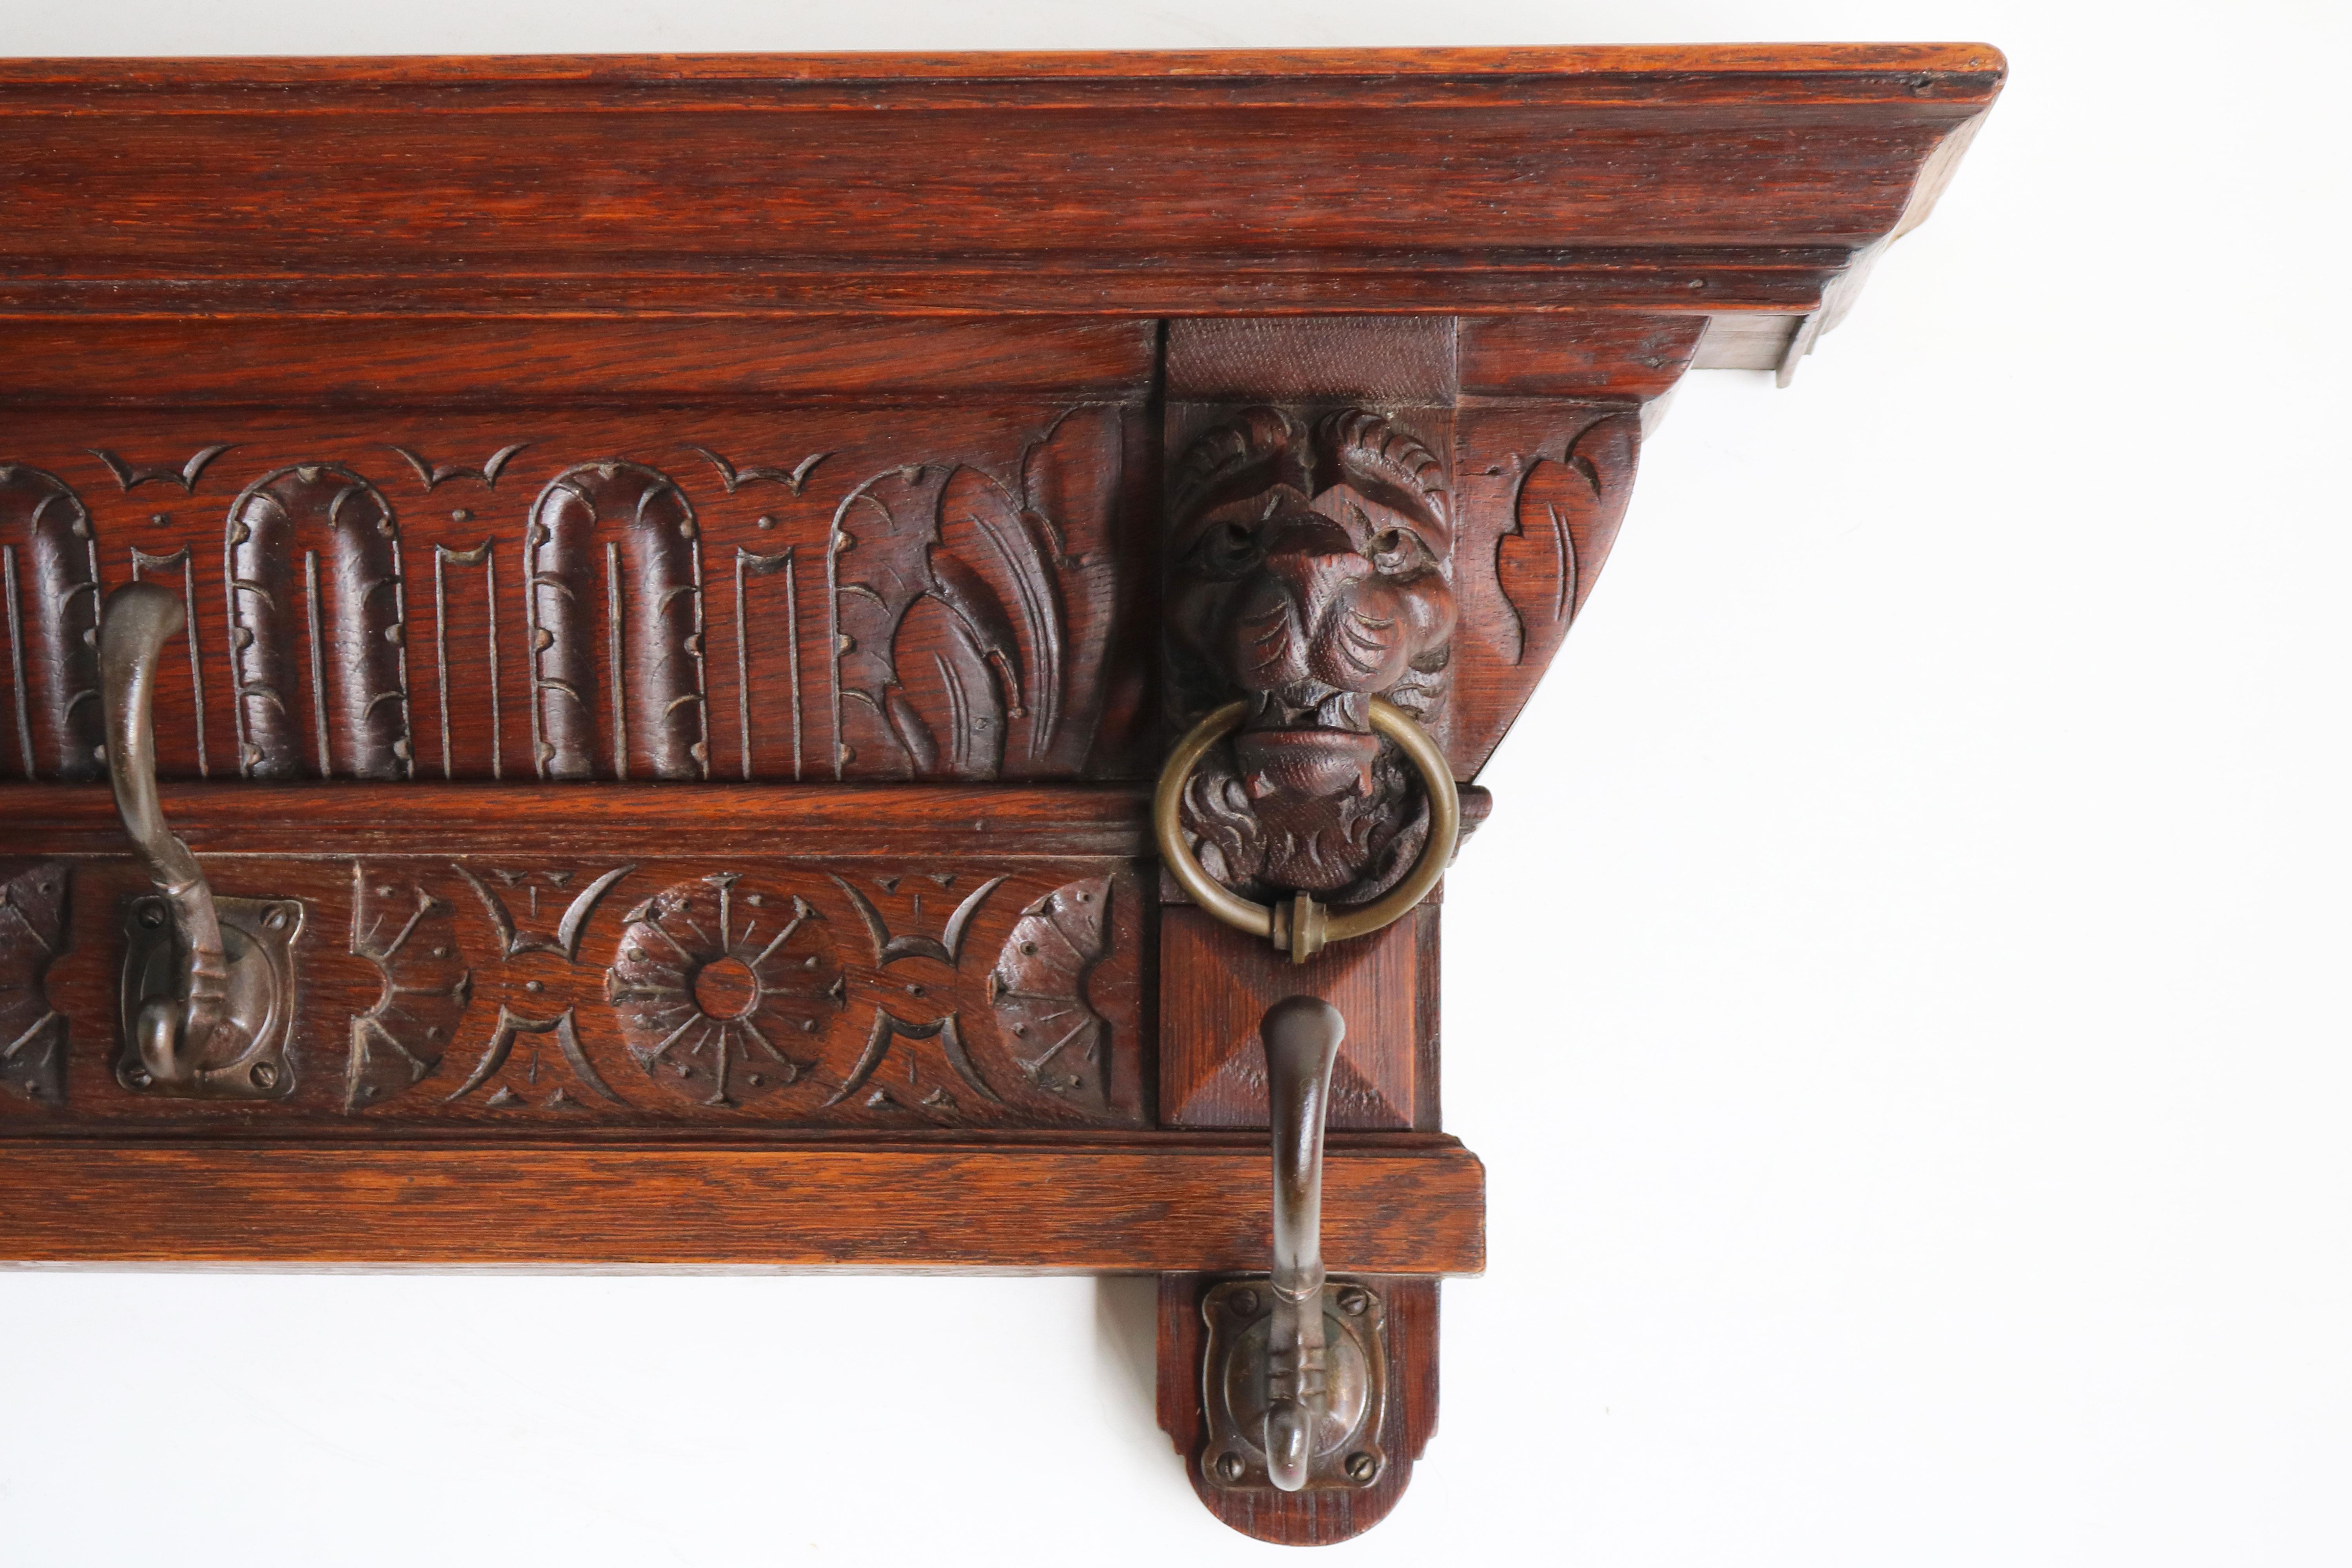 Stunning antique French solid oak hand carved coat rack from the 1900s.
French Renaissance revival with symmetrical & highly detailed carvings and 2 impressive Lion heads holding brass rings.
The coatrack is in superb condition and well taken care